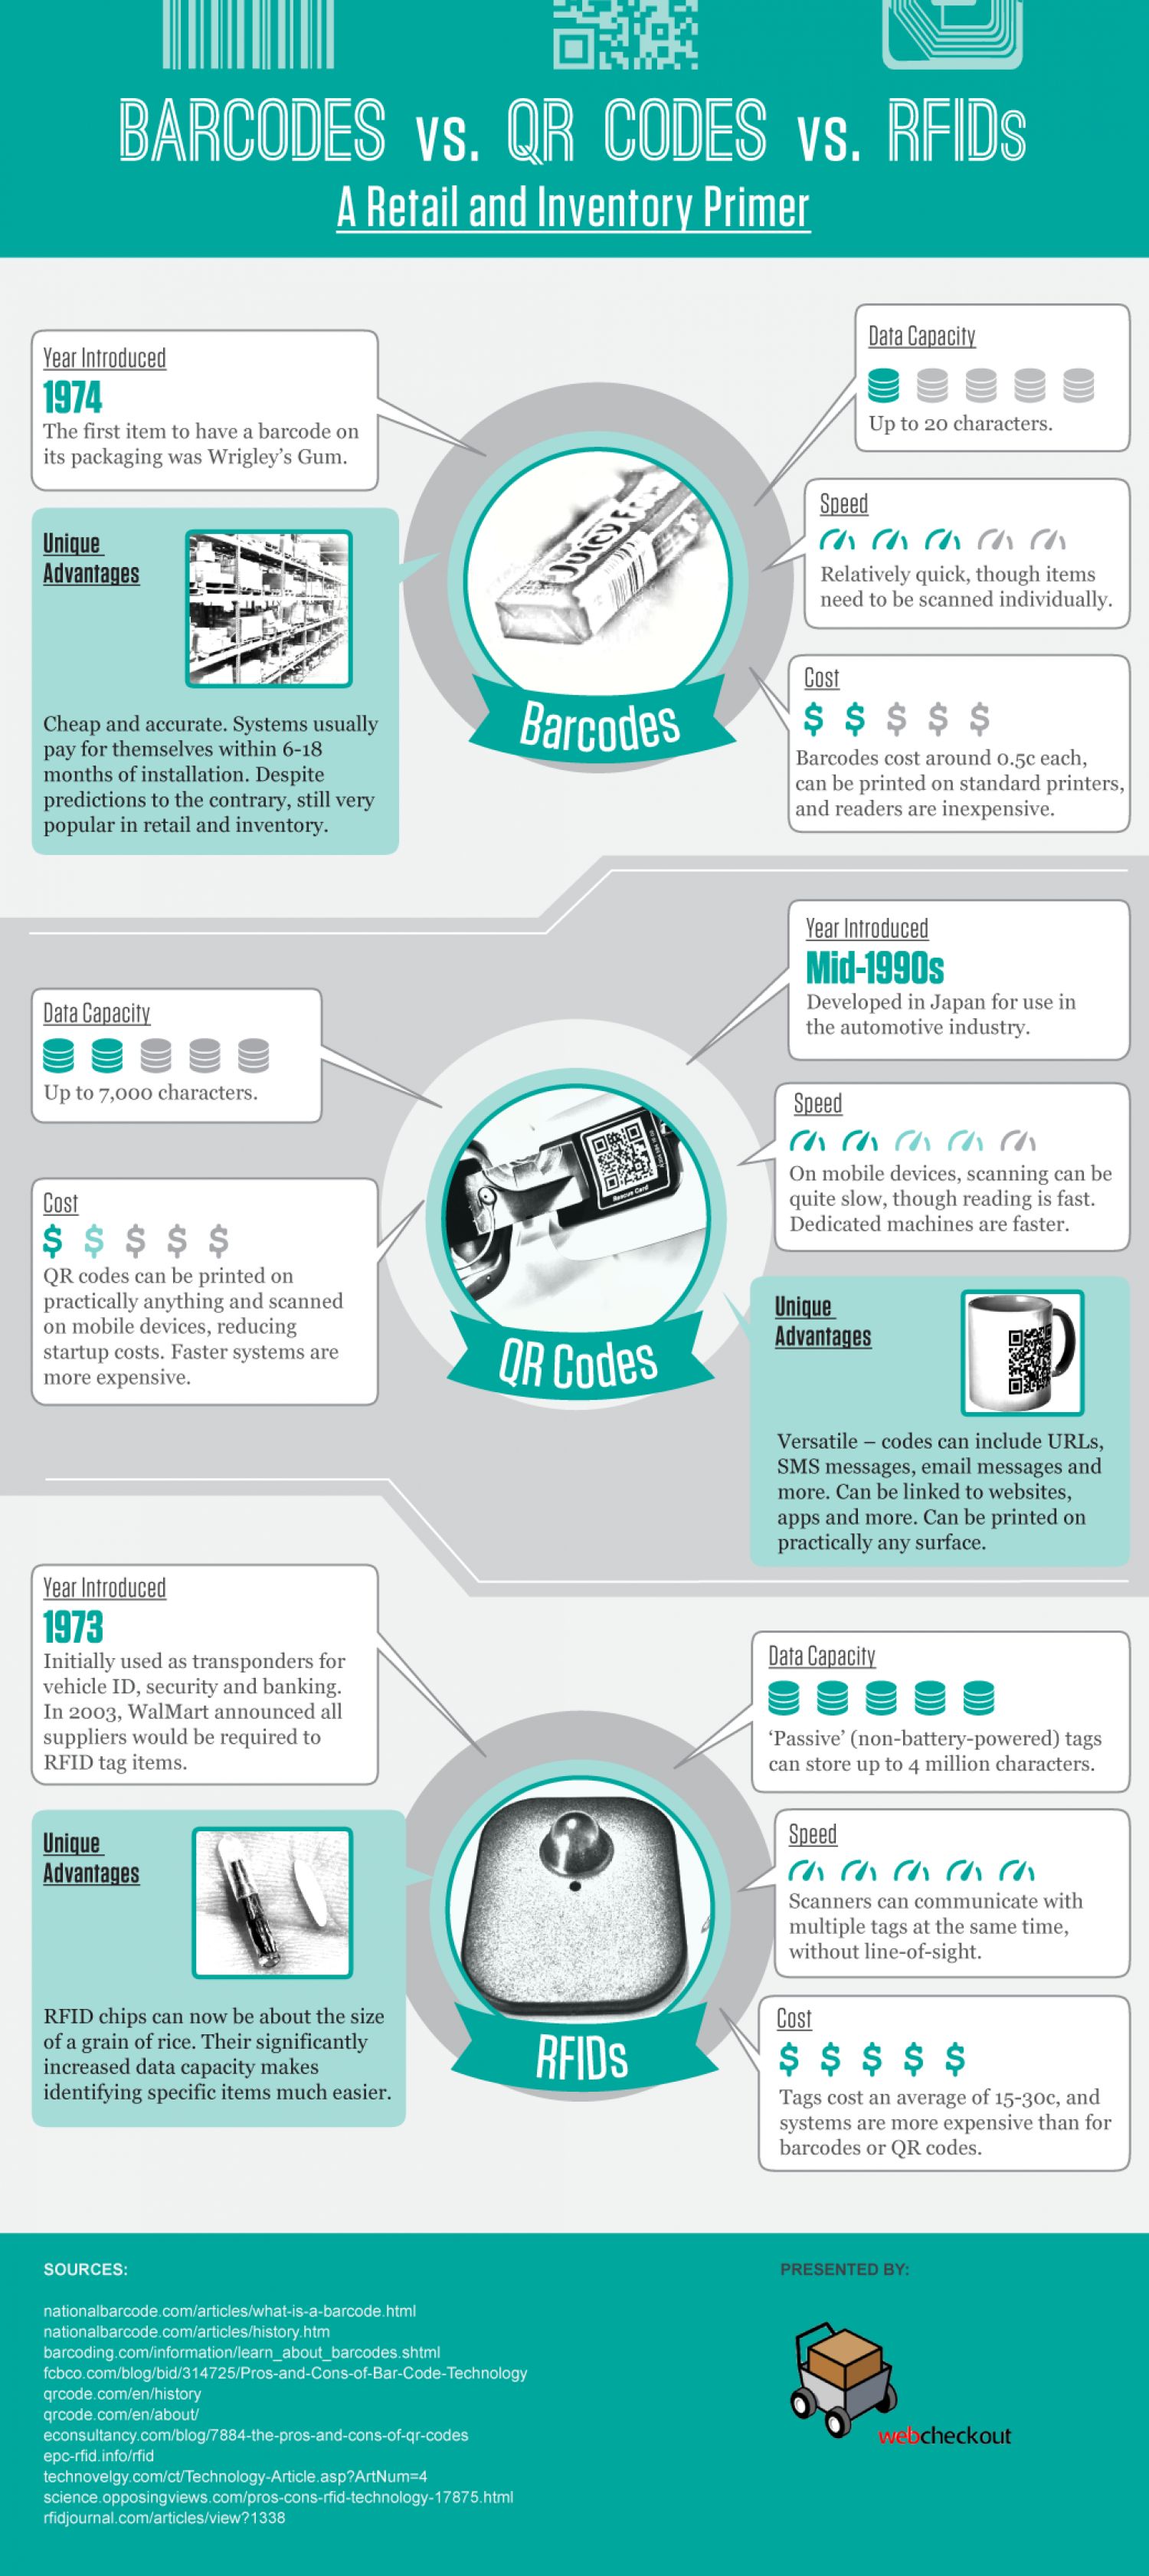 Asset Tracking: RFIDs, Barcodes or QR Codes? Infographic